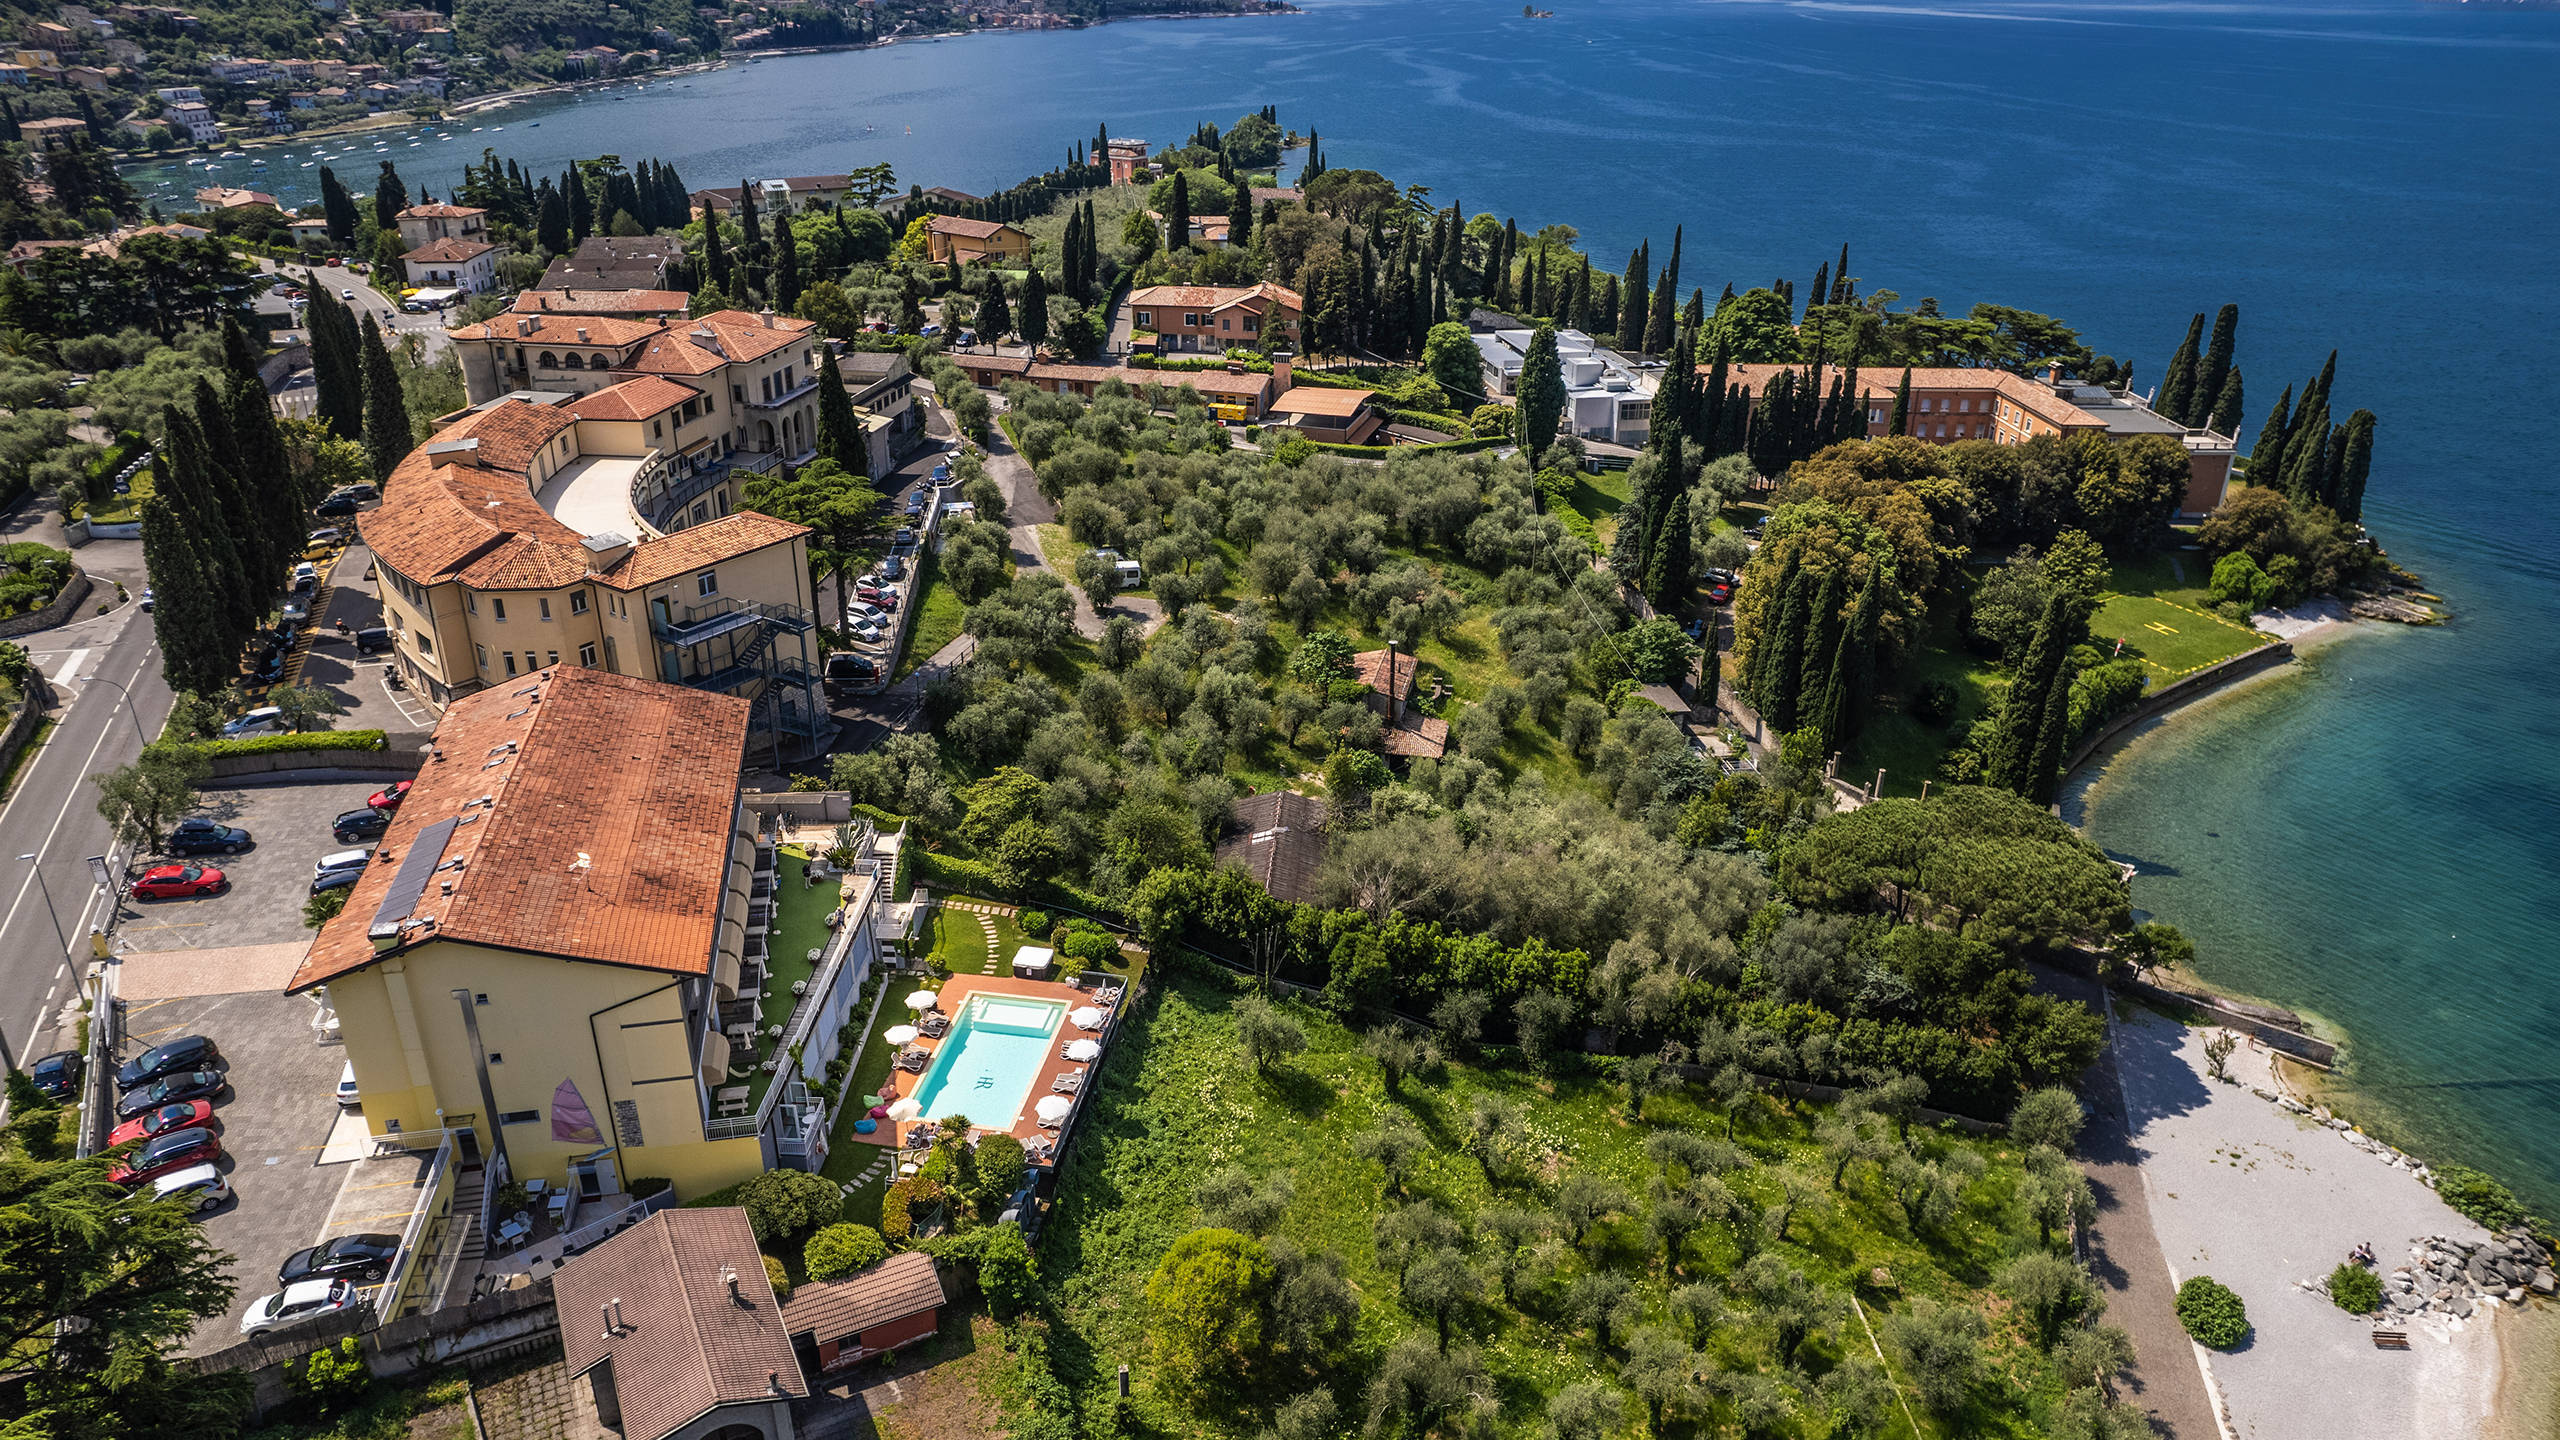 Aparthotel Rome - Malcesine - Apartments and rooms on Lake Garda